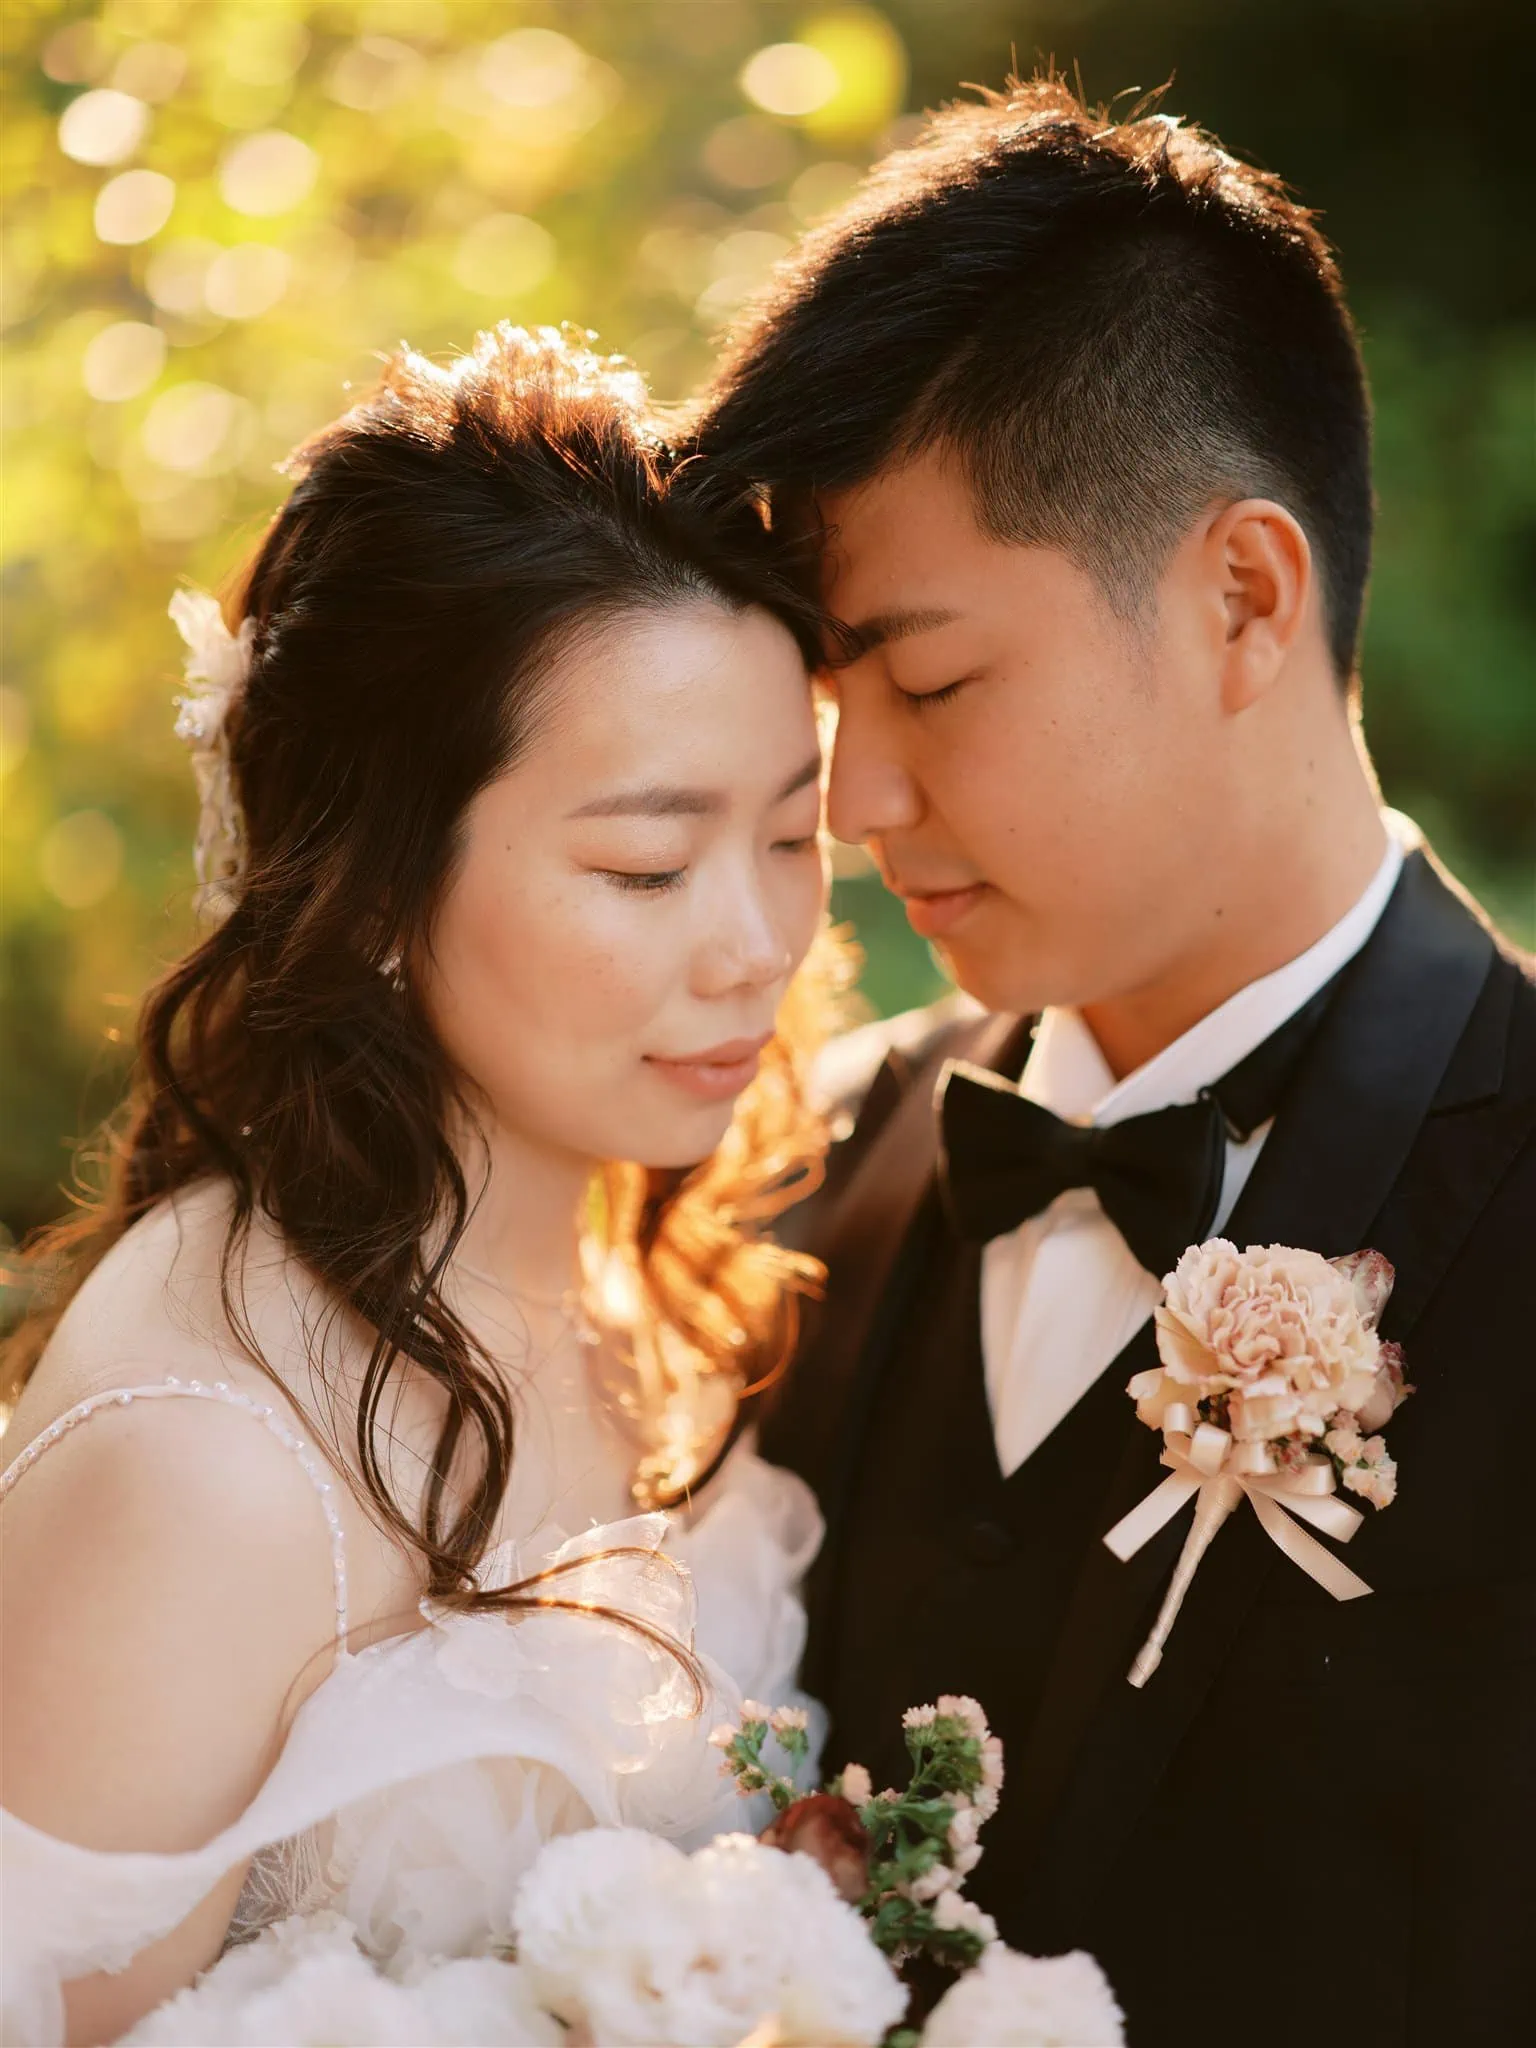 Kyoto Tokyo Japan Elopement Wedding Photographer, Planner & Videographer | A Japanese bride and groom embracing each other in a park, beautifully captured by an exceptional elopement photographer.